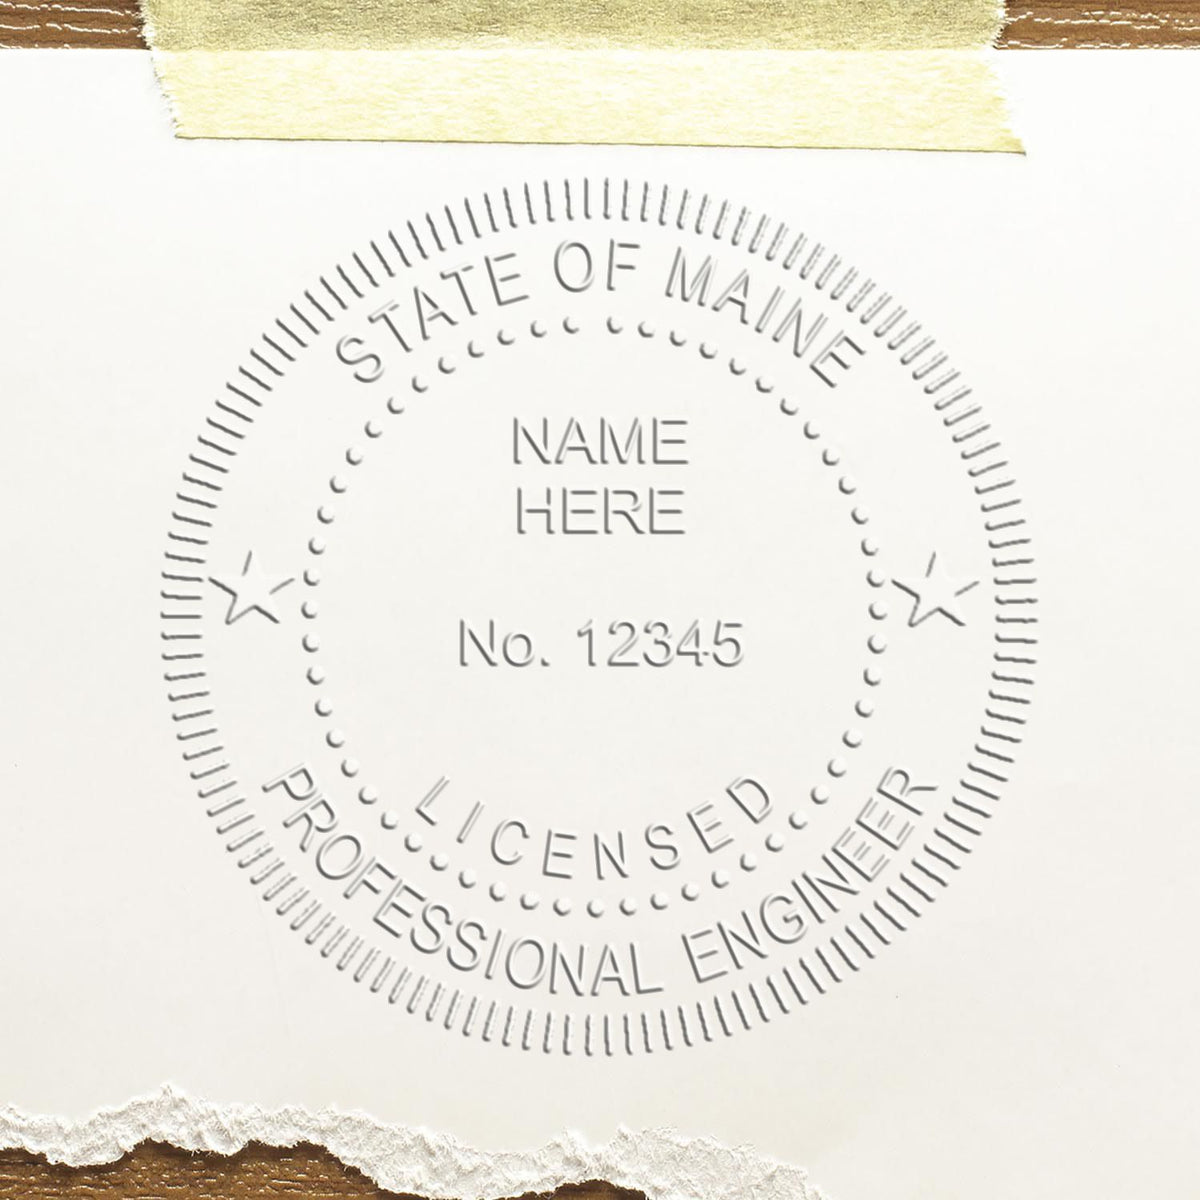 The State of Maine Extended Long Reach Engineer Seal stamp impression comes to life with a crisp, detailed photo on paper - showcasing true professional quality.